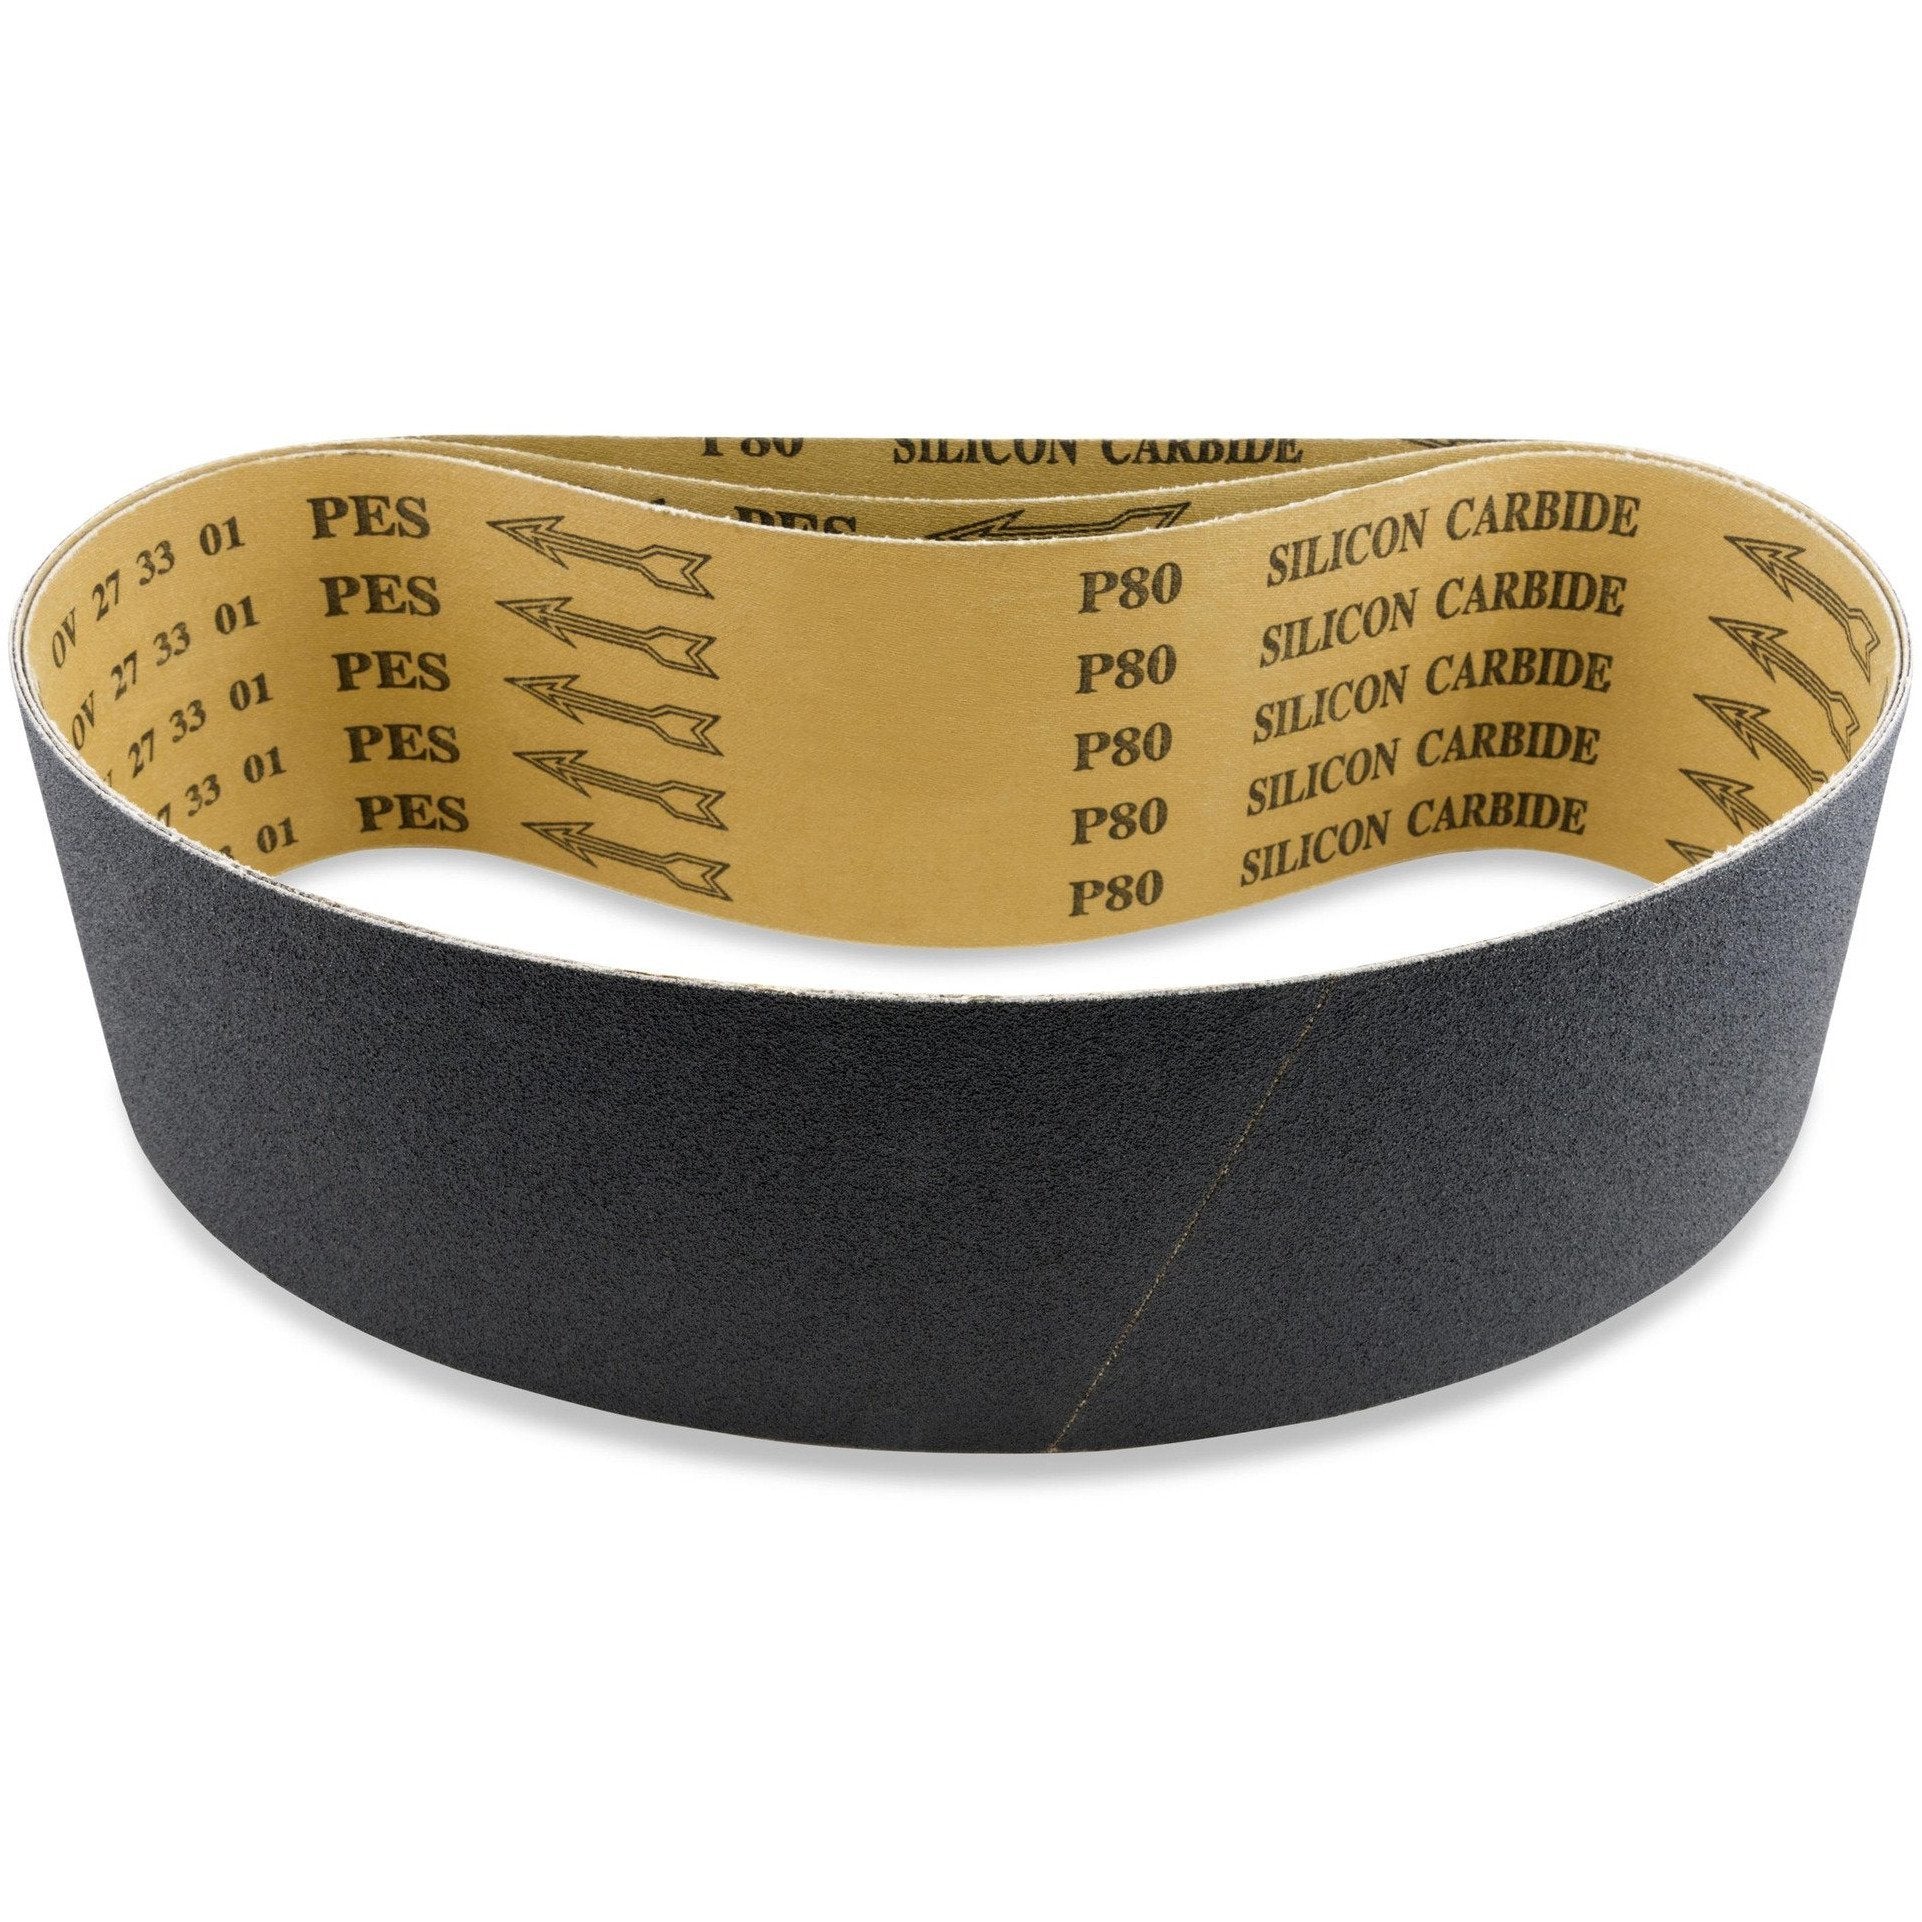 2 X 48 Inch Industrial Grade Silicon Carbide Sanding Belts, 6 Pack - Red Label Abrasives